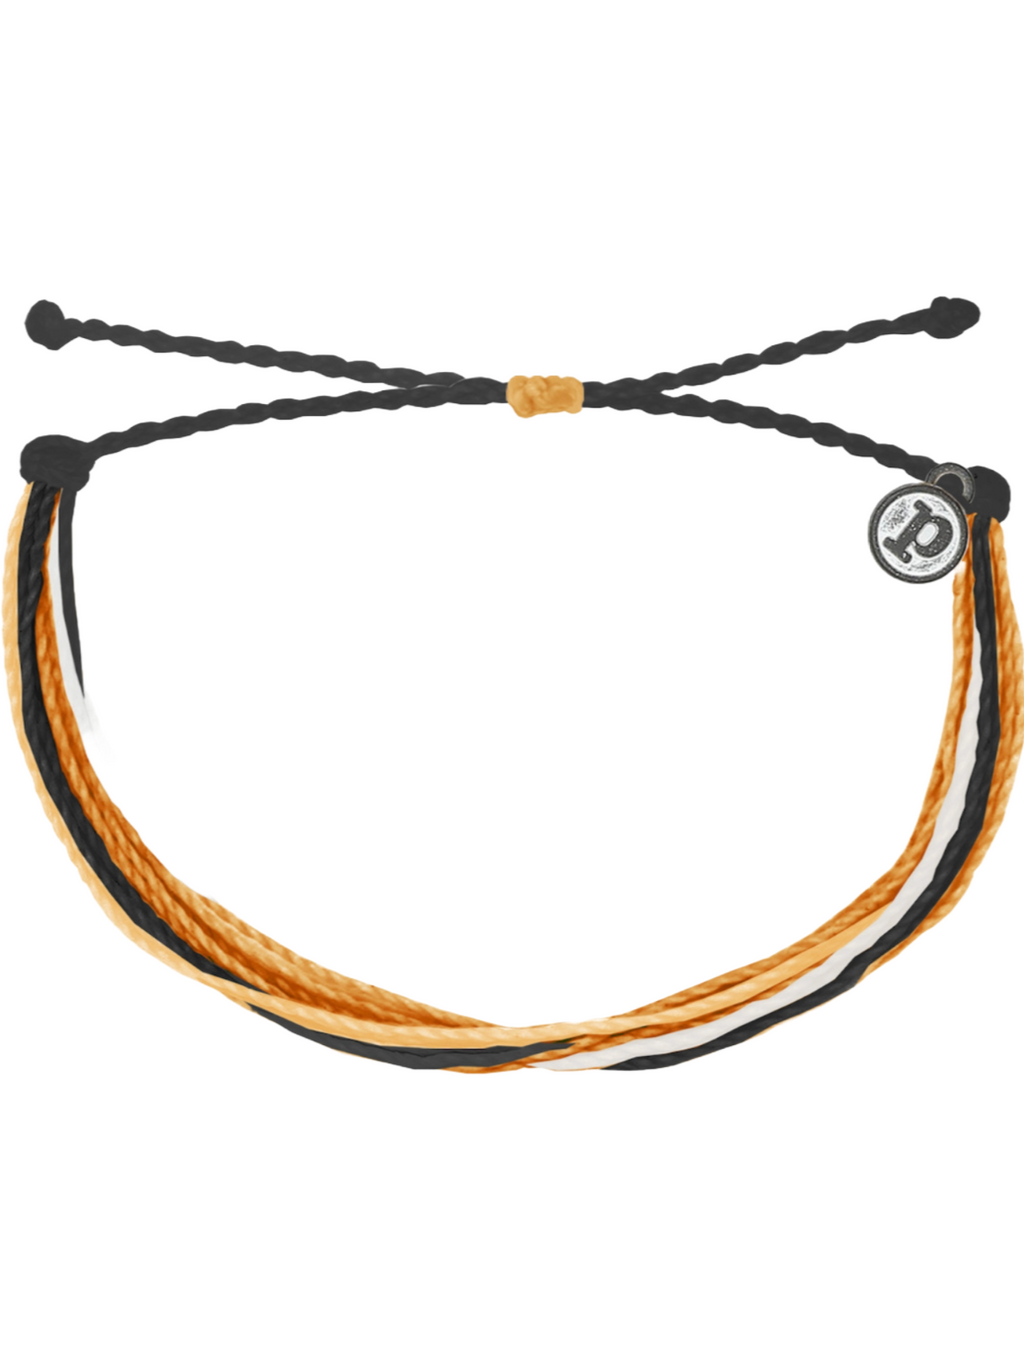 Pura Vida Bright Originals Trick or Treat Bracelet  It’s the bracelet that started it all. Each one is handmade, waterproof and totally unique— in fact, the more you wear it, the cooler it looks. Grab yours today to feel the Pura Vida vibes.  Waterproof Go surf, snowboard, or even take a shower with them on. - 100% waterproof - Wax-coated - Adjustable from approximately 2-5 inches in diameter - Because jewelry products are handcrafted by artisans, dimensions may vary from piece to piece